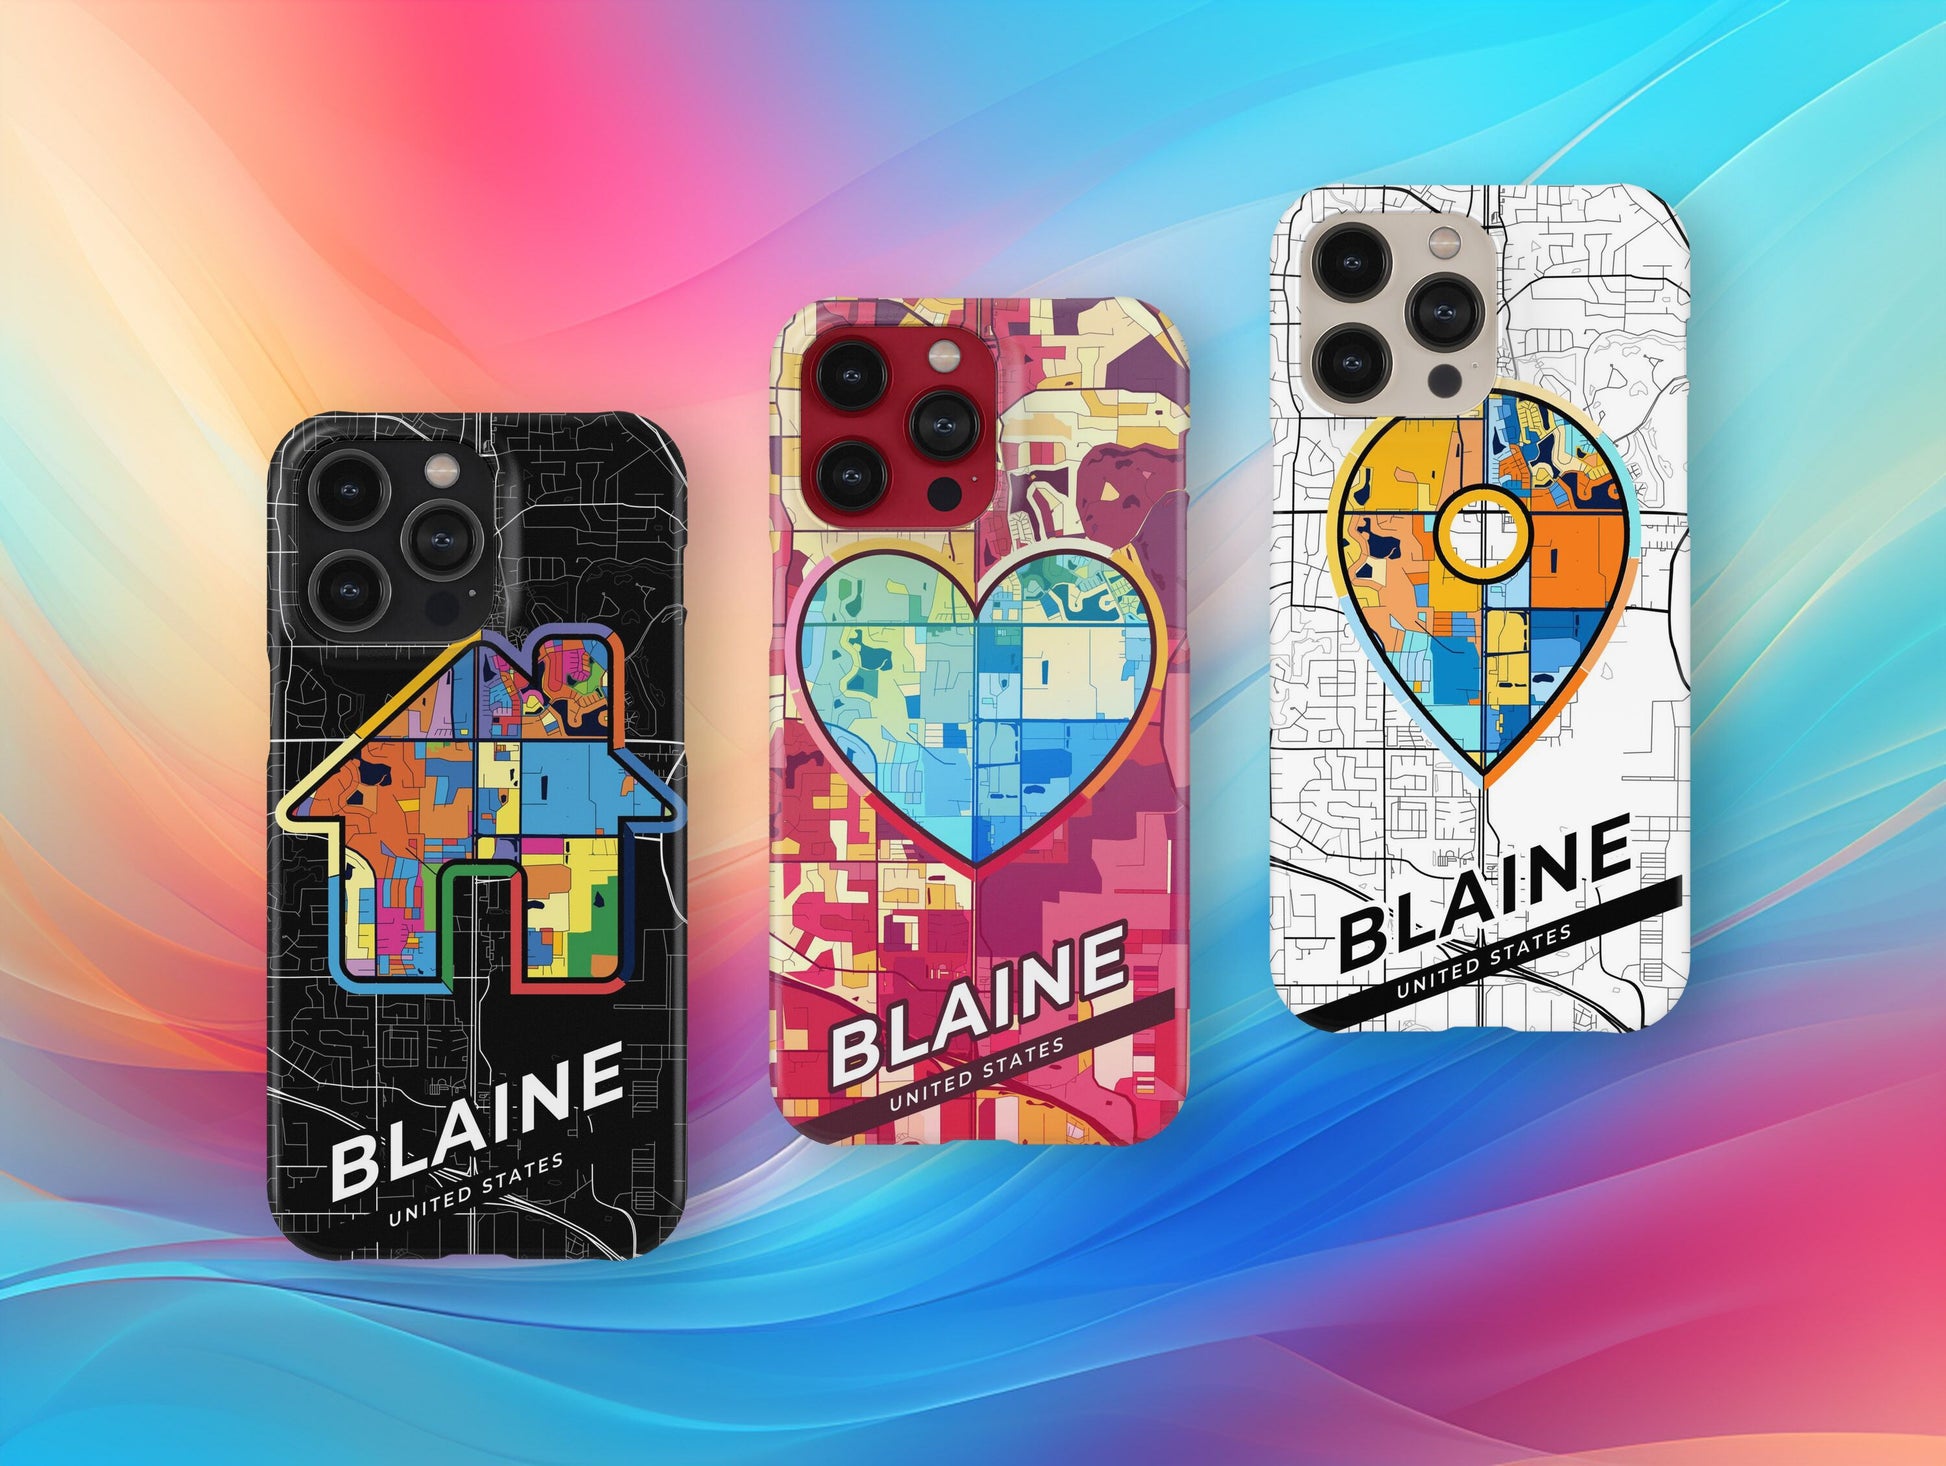 Blaine Minnesota slim phone case with colorful icon. Birthday, wedding or housewarming gift. Couple match cases.